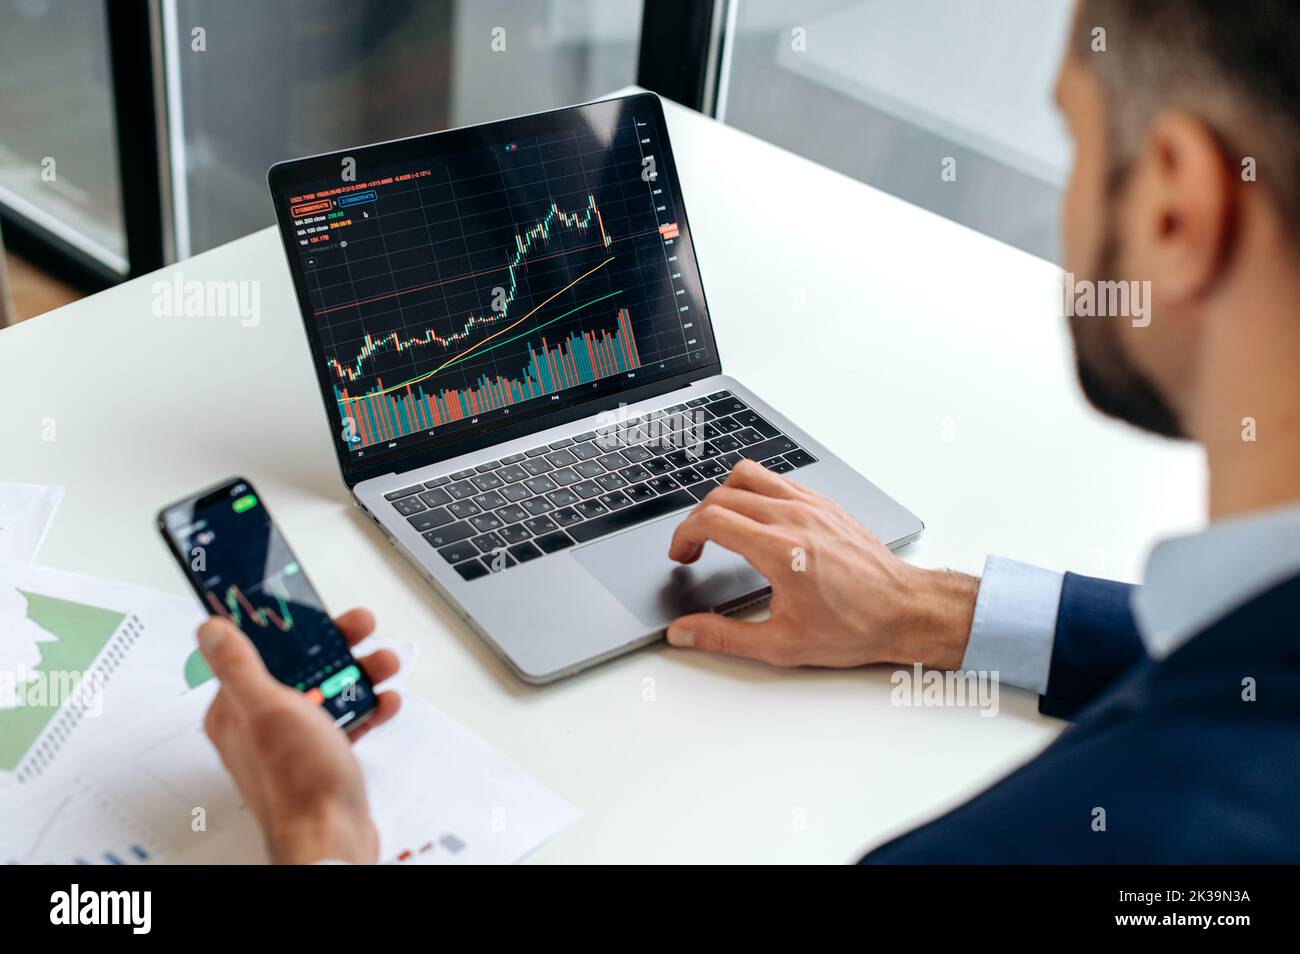 Caucasian crypto trader investor using cellphone and laptop for cryptocurrency financial market analysis, buying or selling cryptocurrency.Close-up of laptop and smart phone screen with stock diagrams Stock Photo